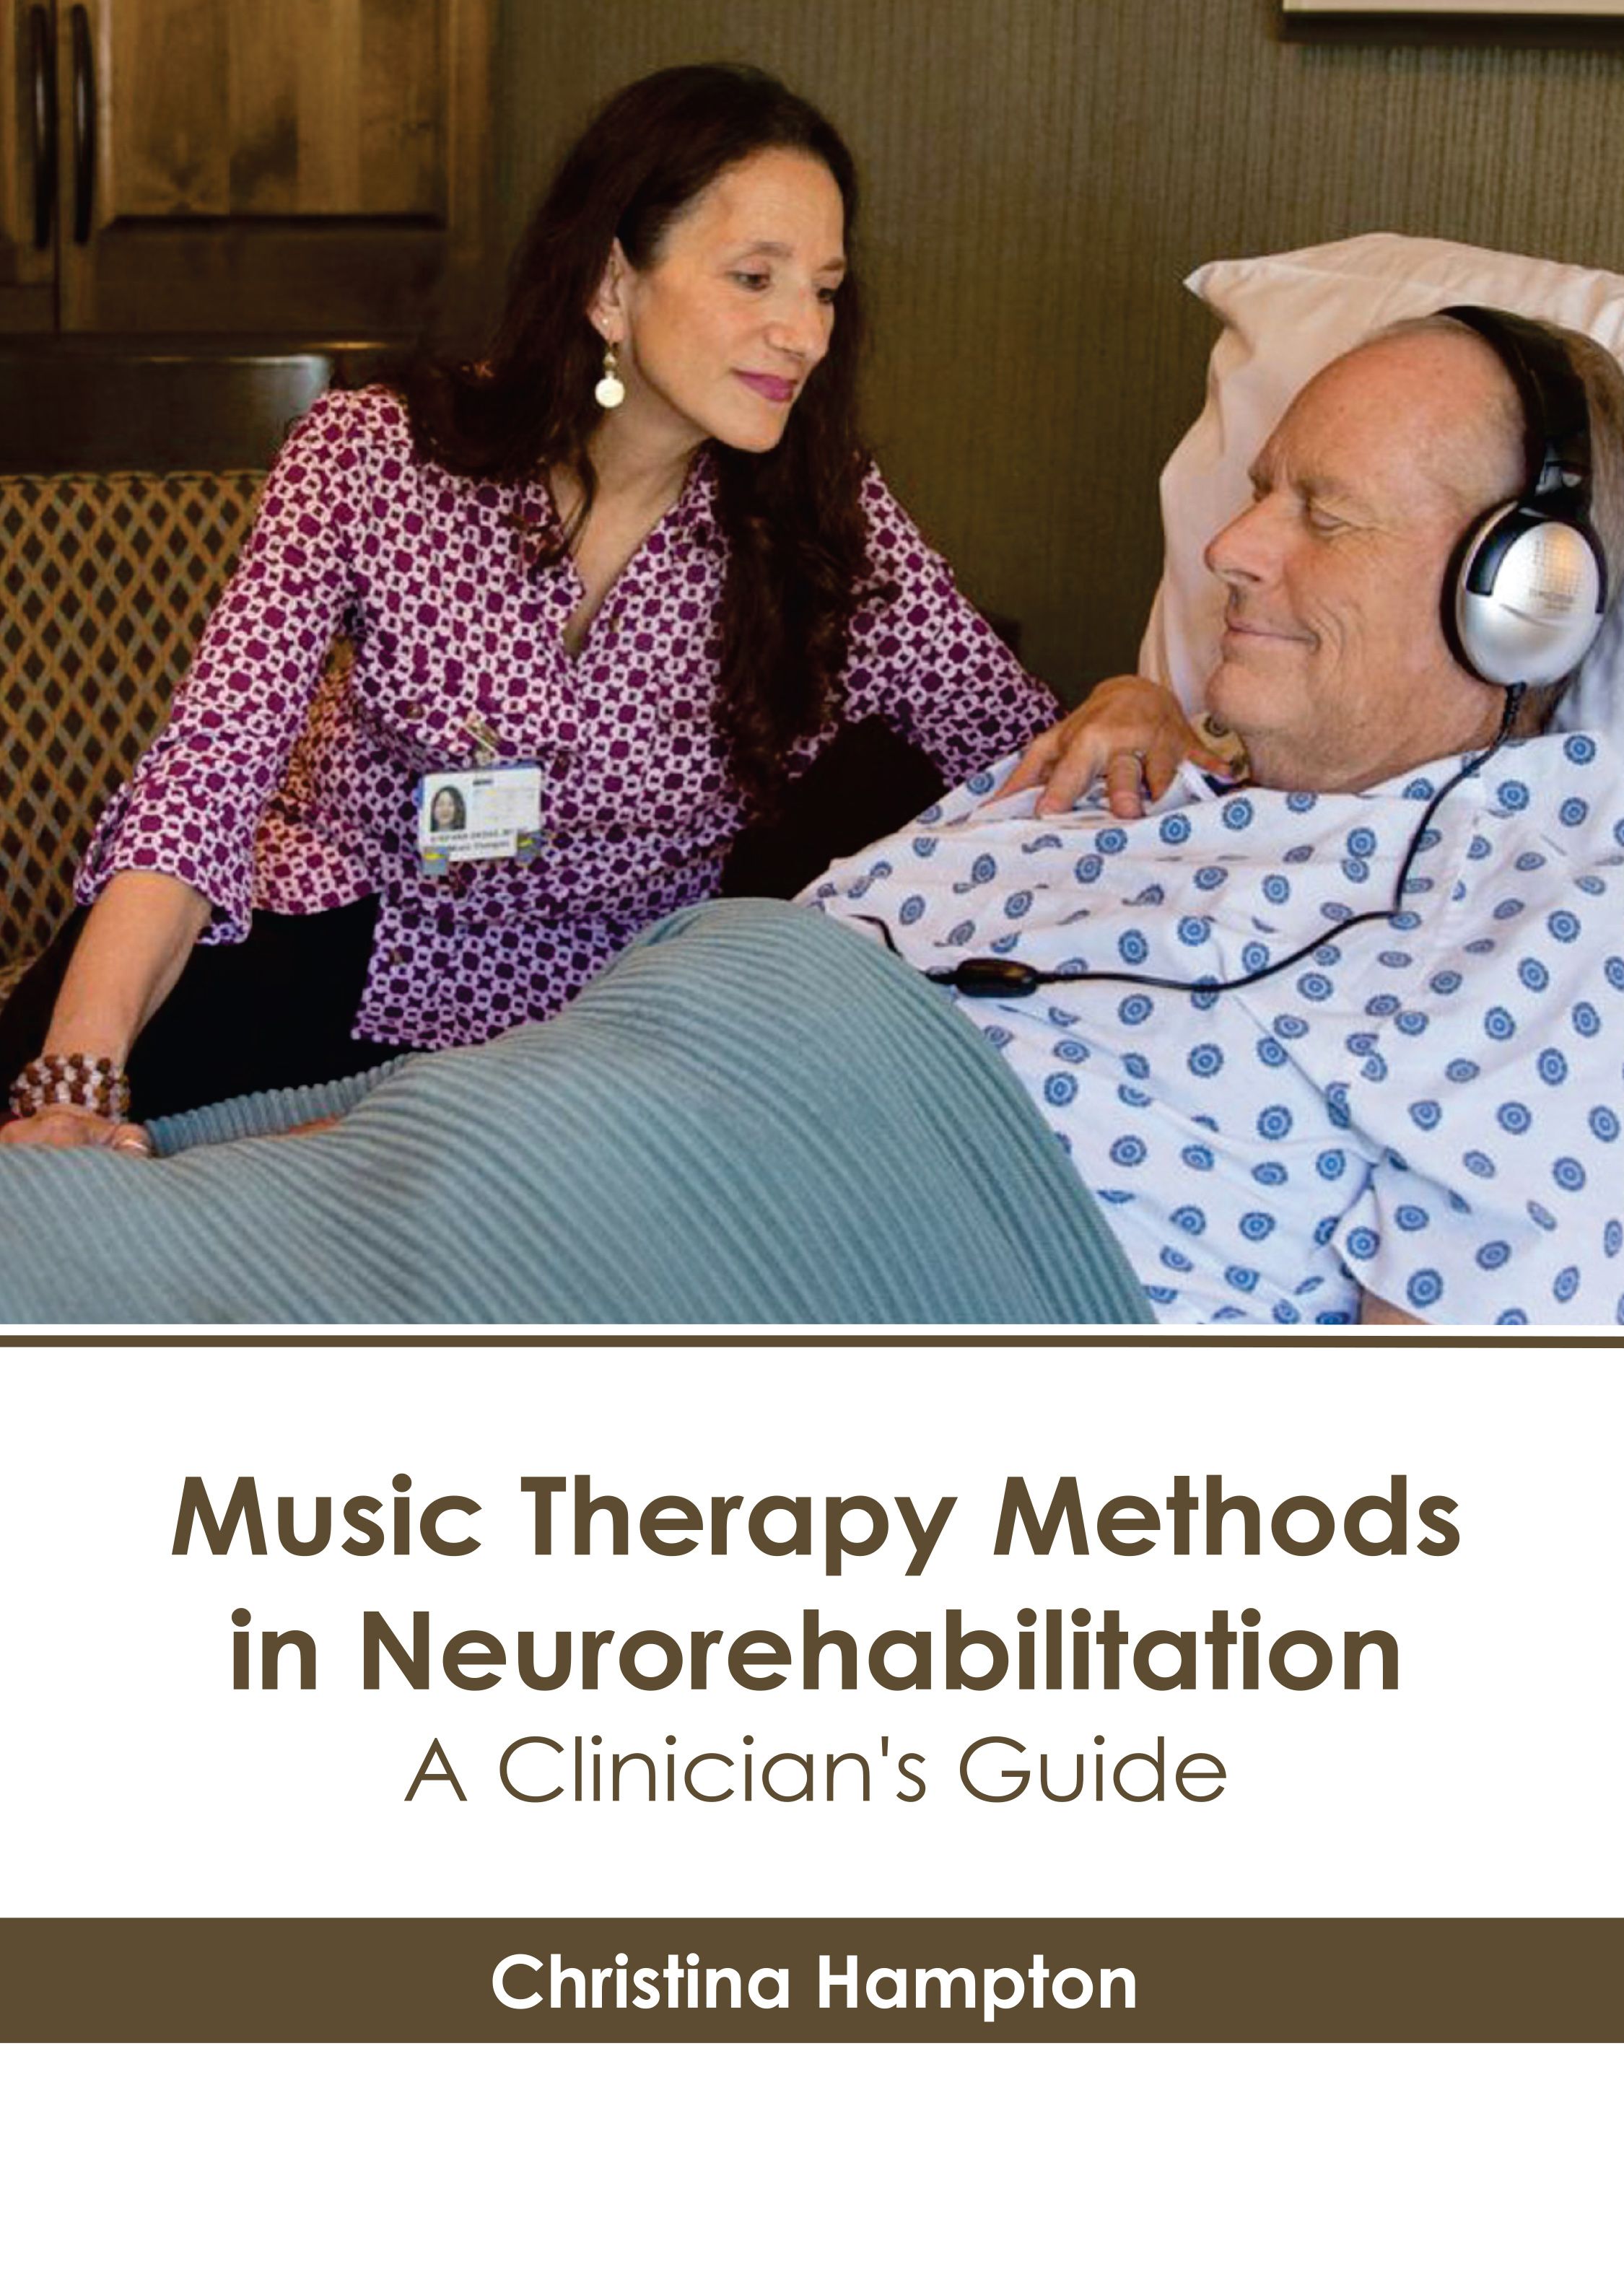 MUSIC THERAPY METHODS IN NEUROREHABILITATION: A CLINICIAN'S GUIDE